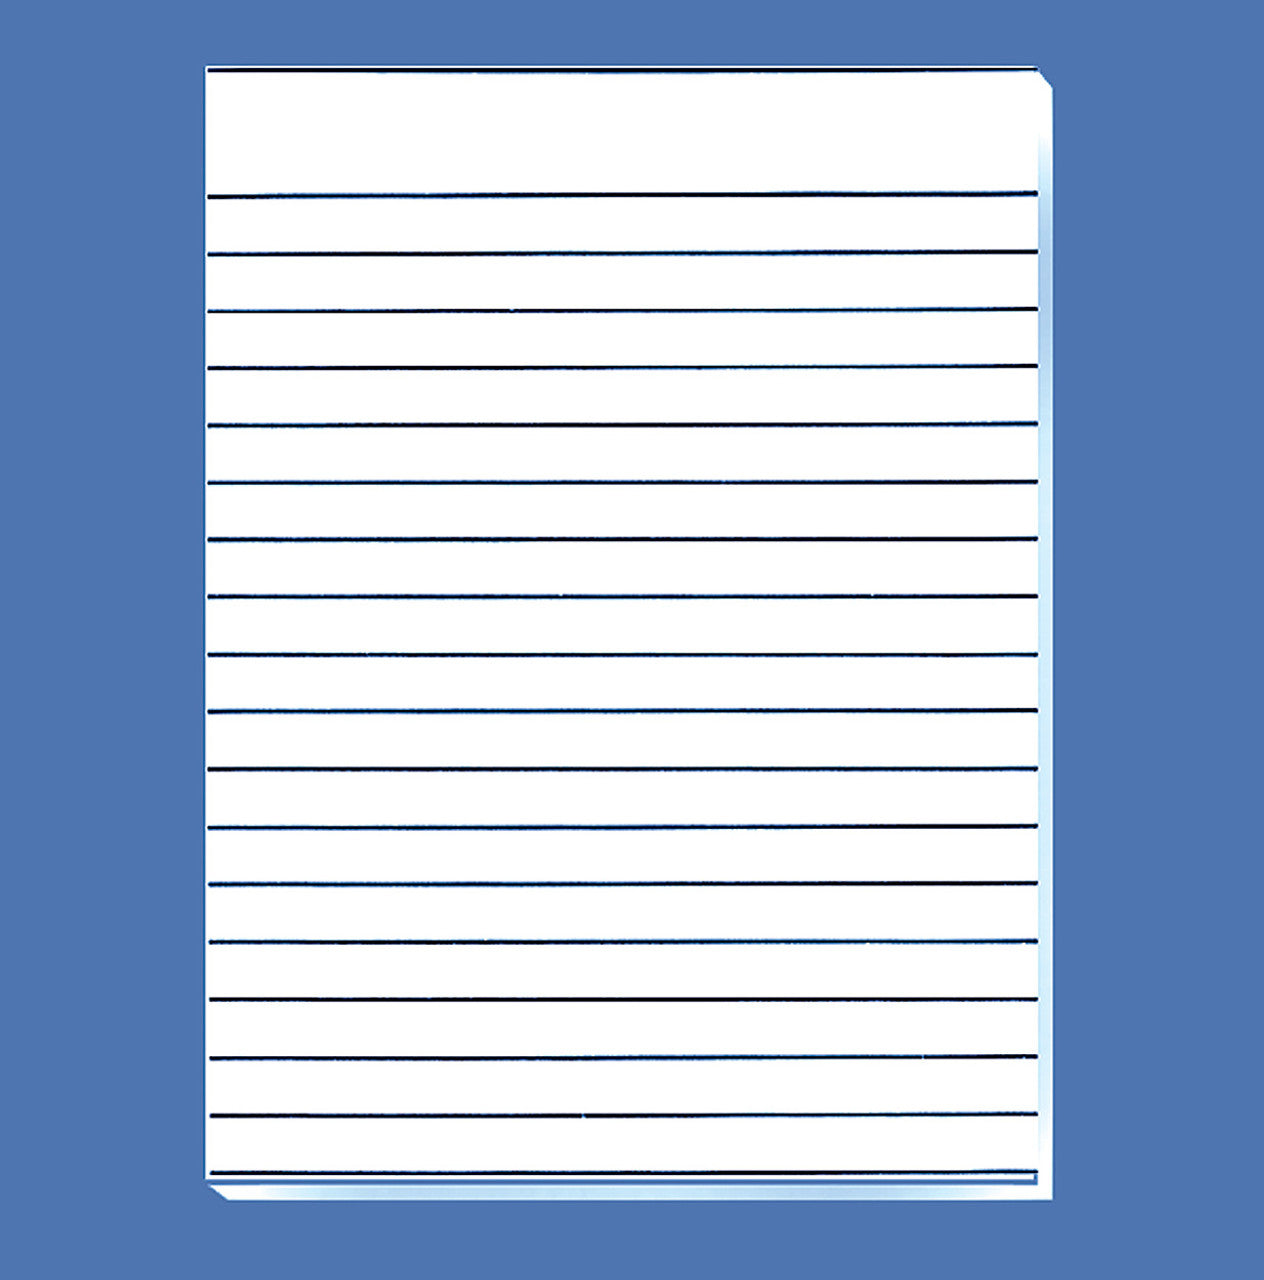 Bold line writing paper. Paper pads with bold black lines on both sides of the 8.5 x 11 inch sheets. Lines are .56 inches apart. Gummed pad of 100 sheets. 20Lines per page